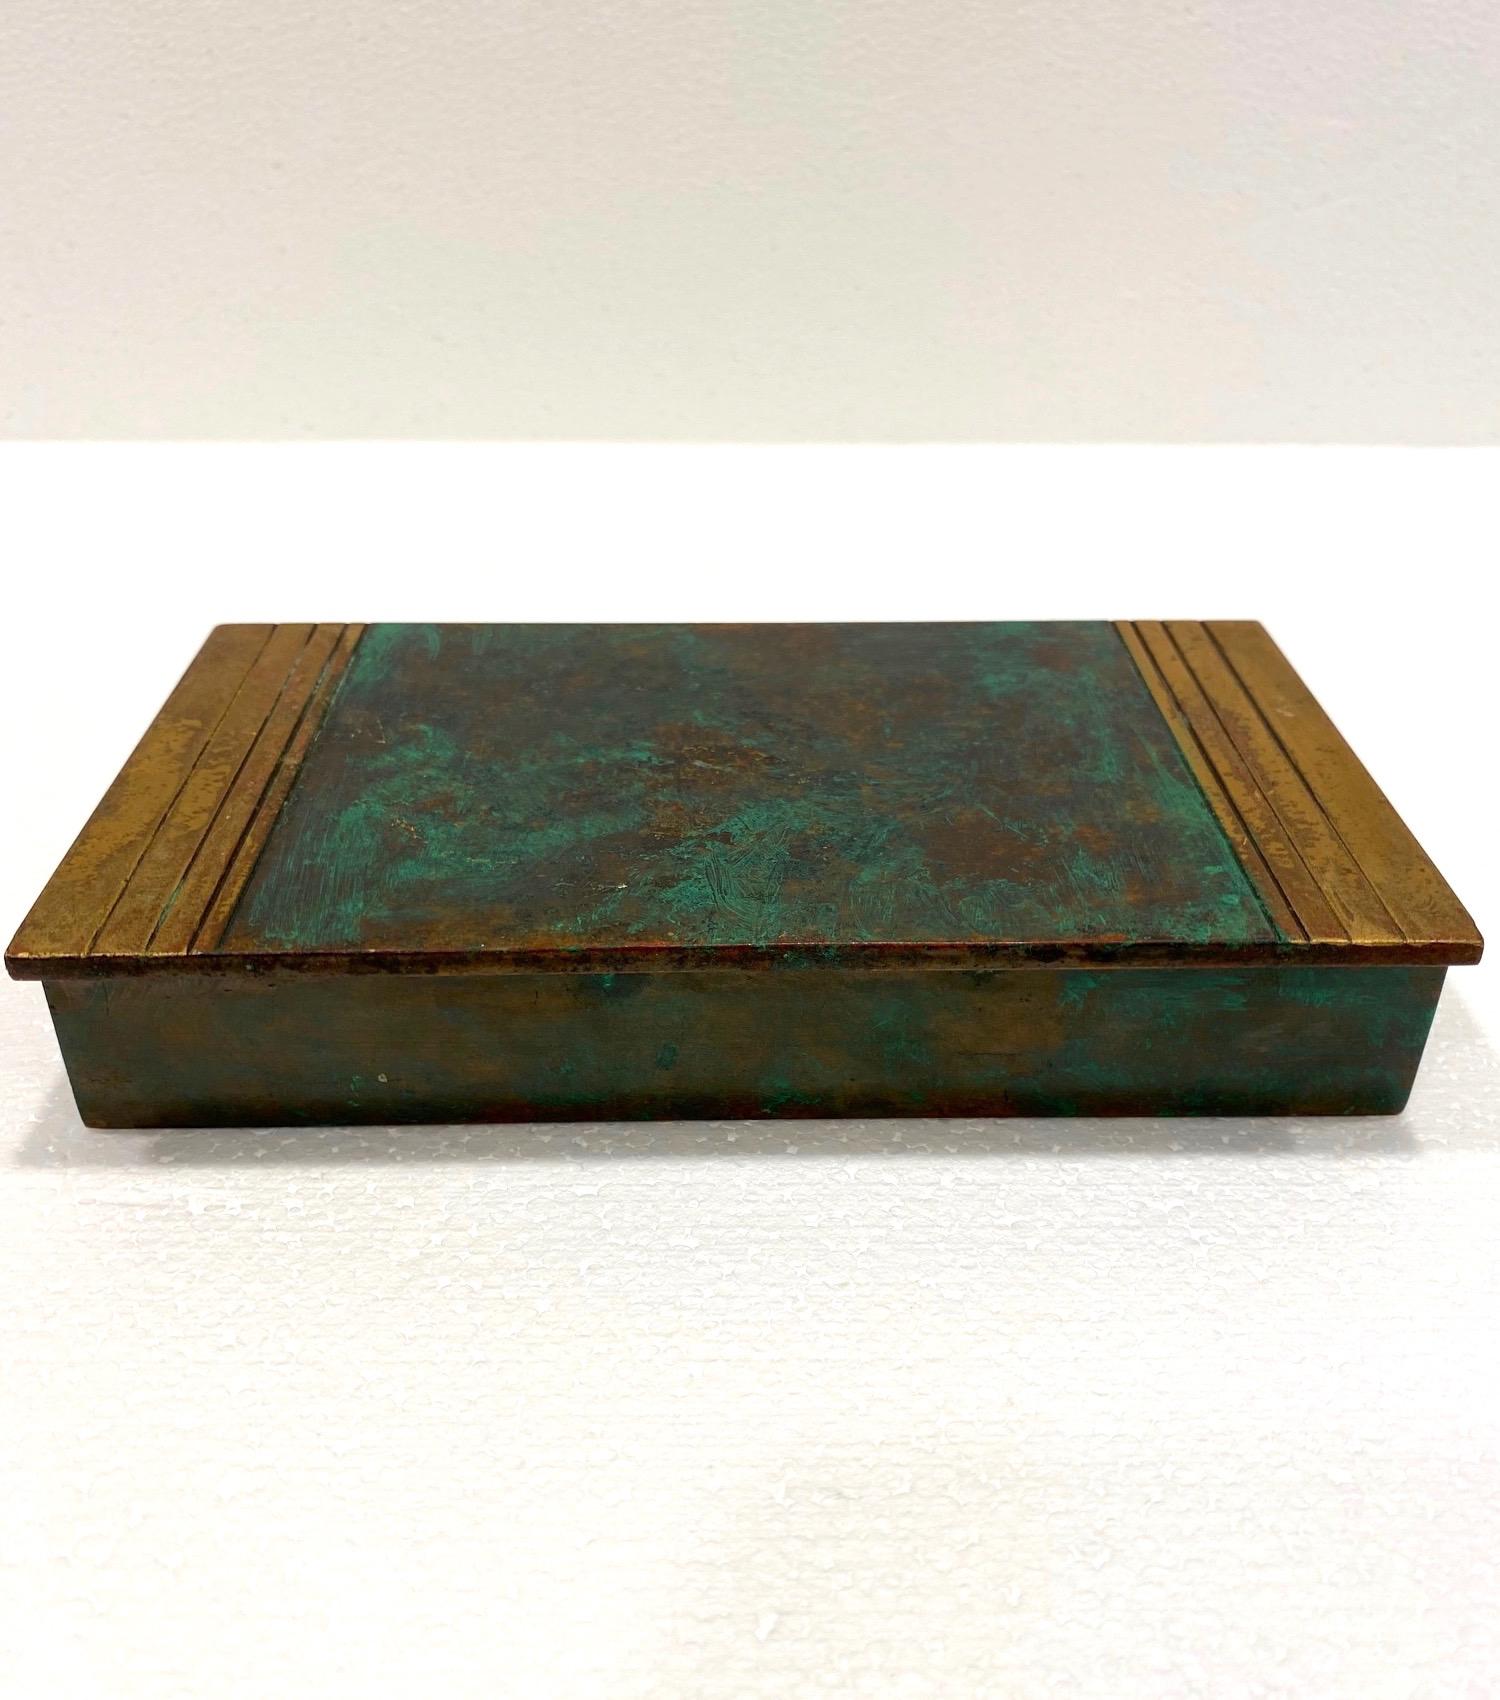 Genuine Art Deco Mid-Century Modern bronze box. Handcrafted box features hinged lid with beautiful green patina throughout, and incised geometric lines along the top. The oxidized patina and visible signs of age adds to the beauty and allure to this